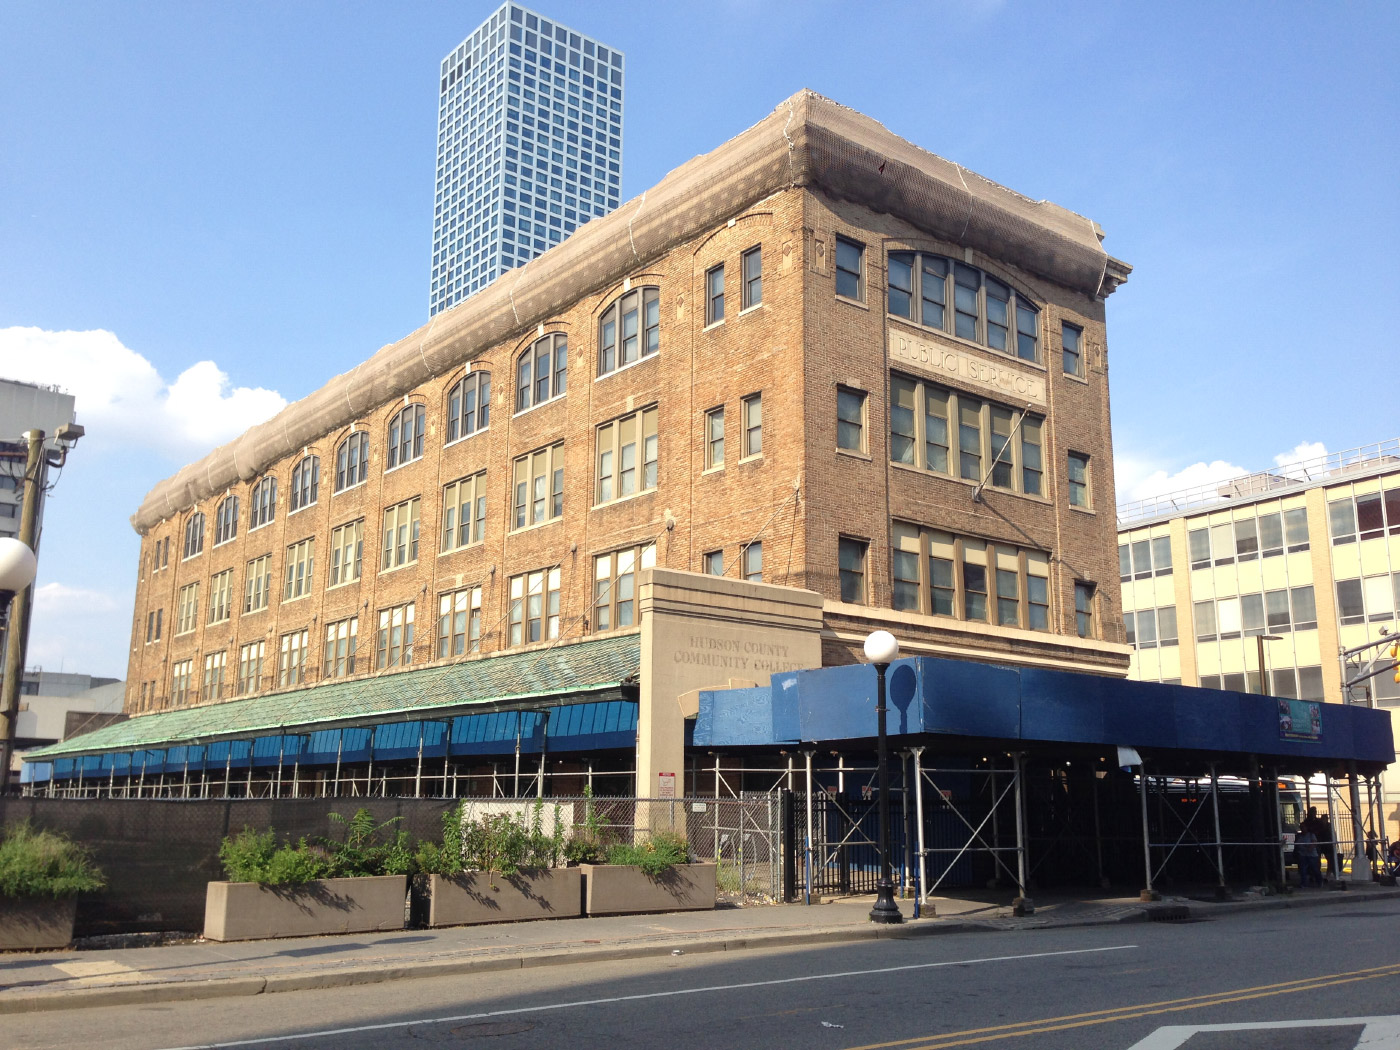 Photo of the Pathside Building in Jersey City, future home of the Jersey City Museum